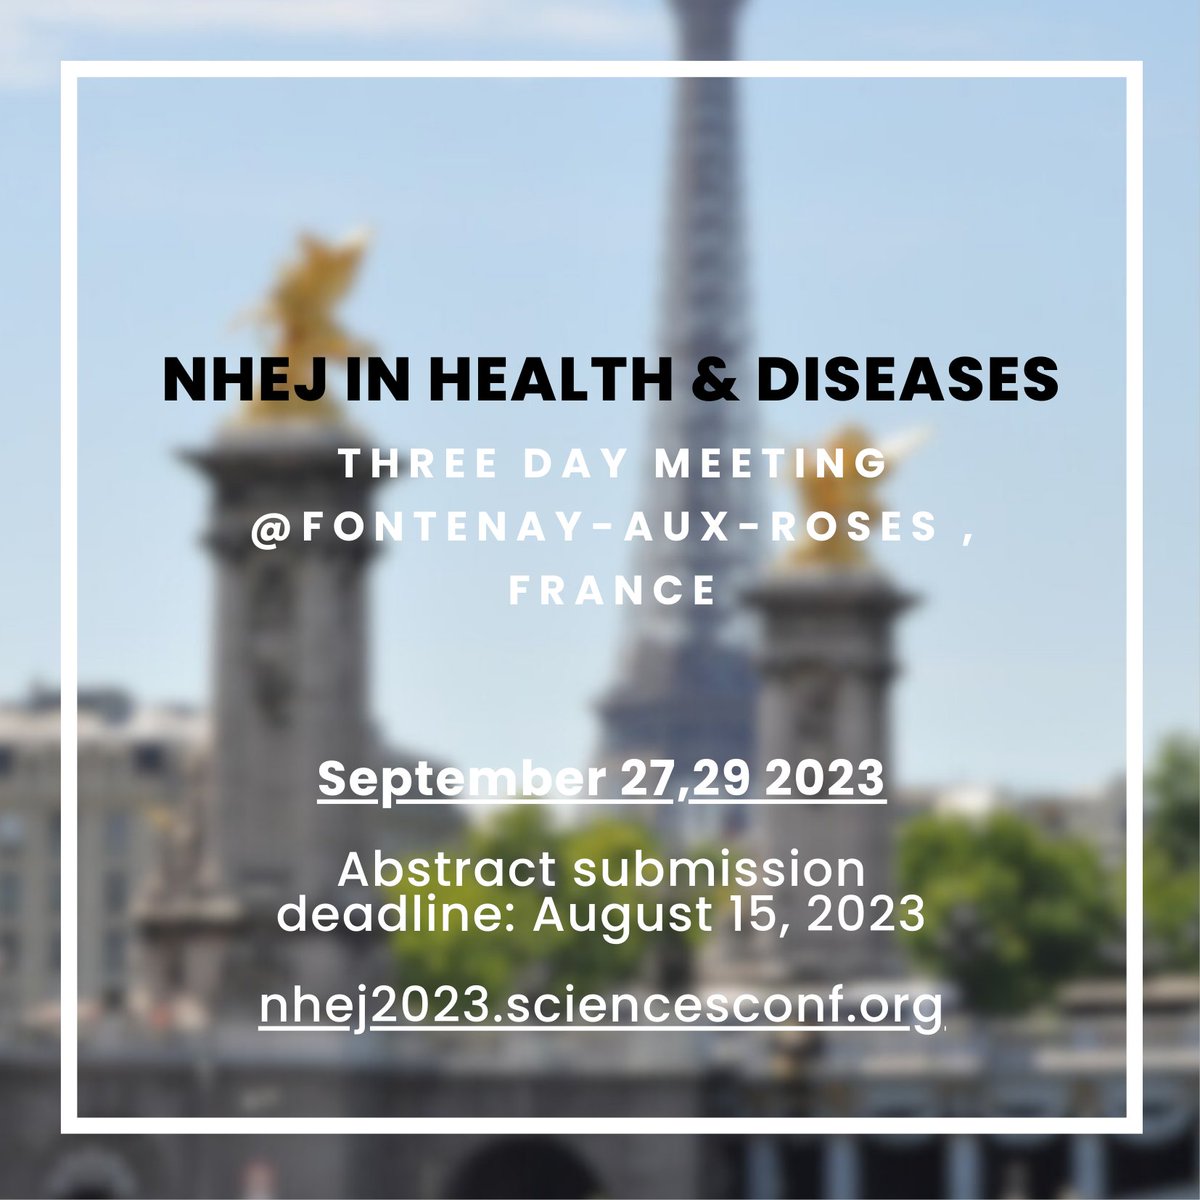 [🗓️ #event] 🧬Interested by #NHEJ pathway and its roles in development and #cancer ? It's still time to register for the three day international meeting that will be held in Fontenay-aux-Roses (France 🇫🇷) on September 27-29, 2023. All informations online➡️nhej2023.sciencesconf.org